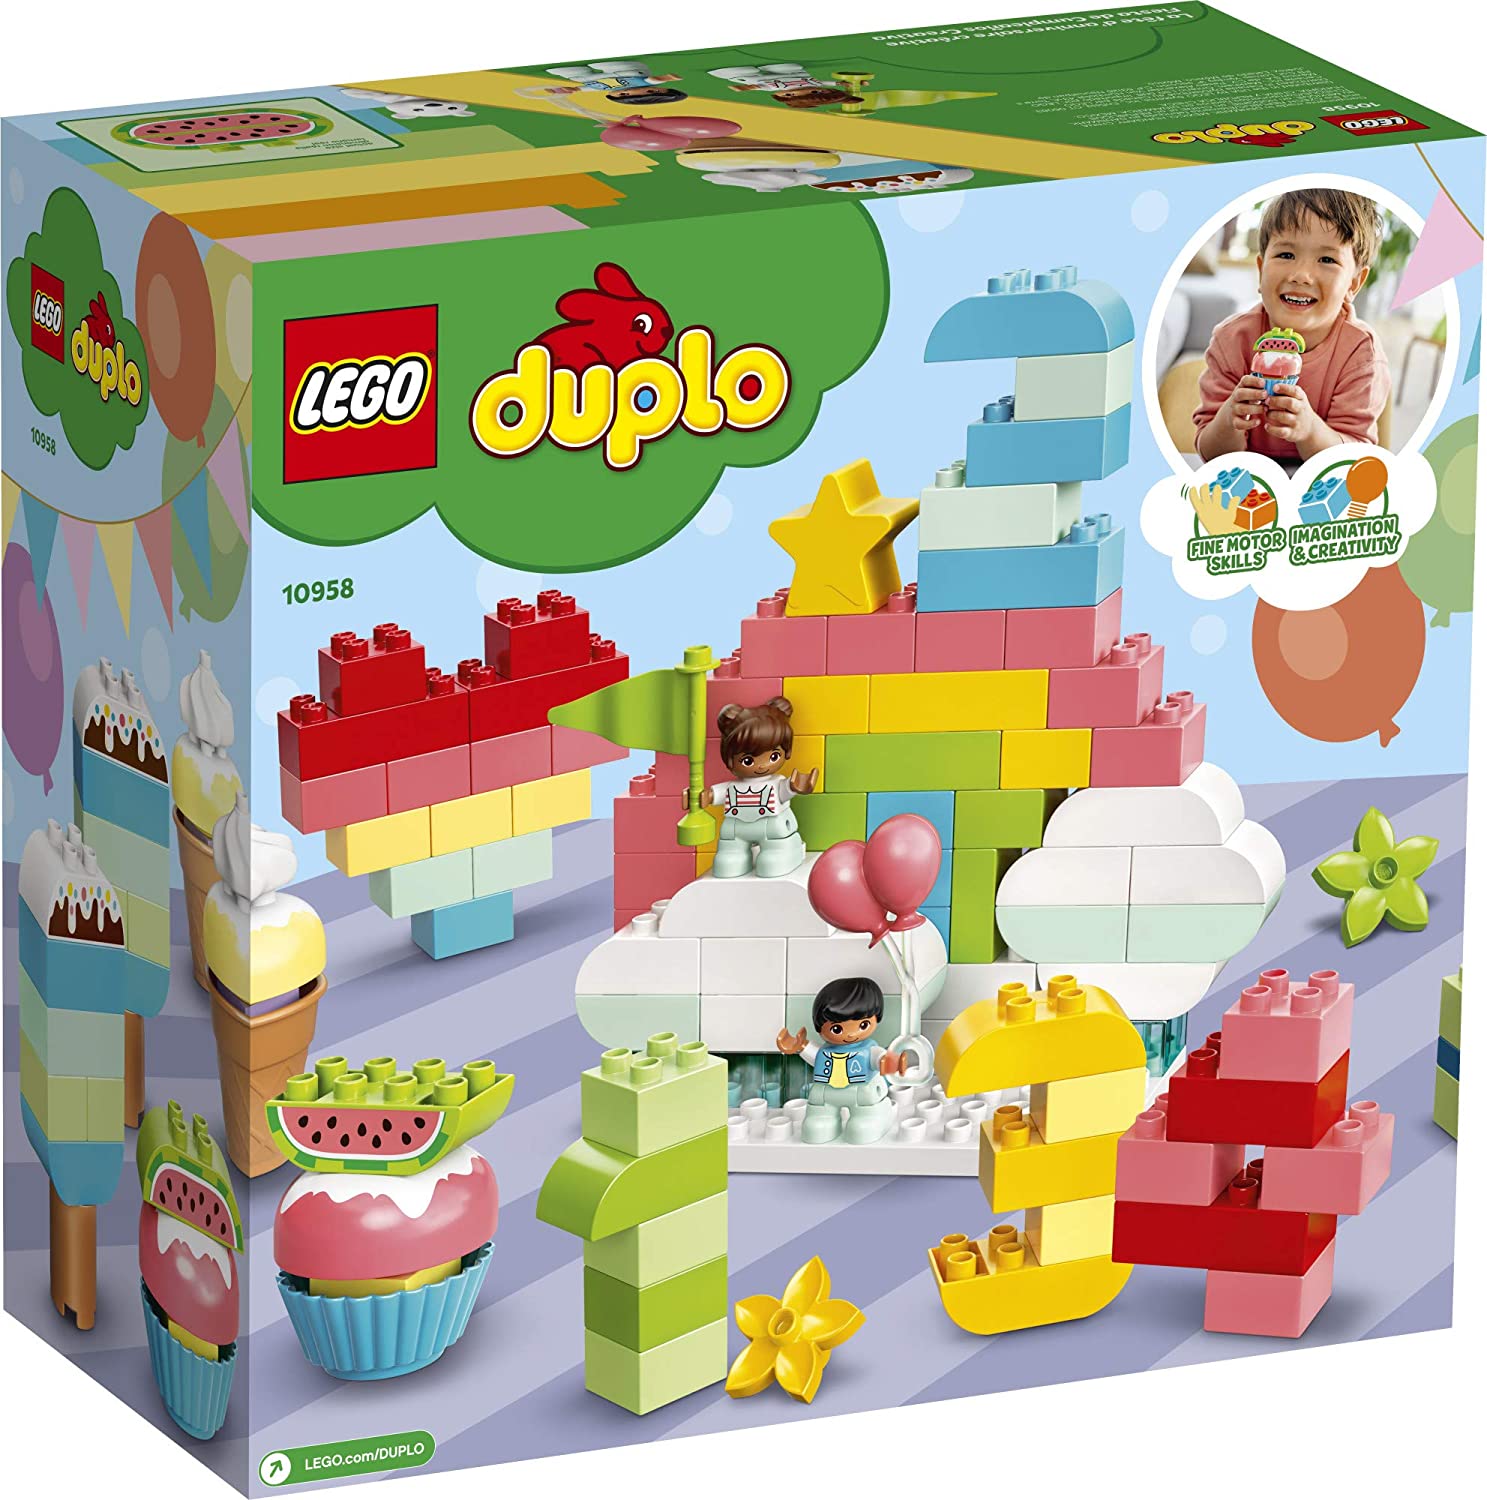 Lego Classic Creative Birthday Party, 200 Pieces - ANB Baby -$50 - $75